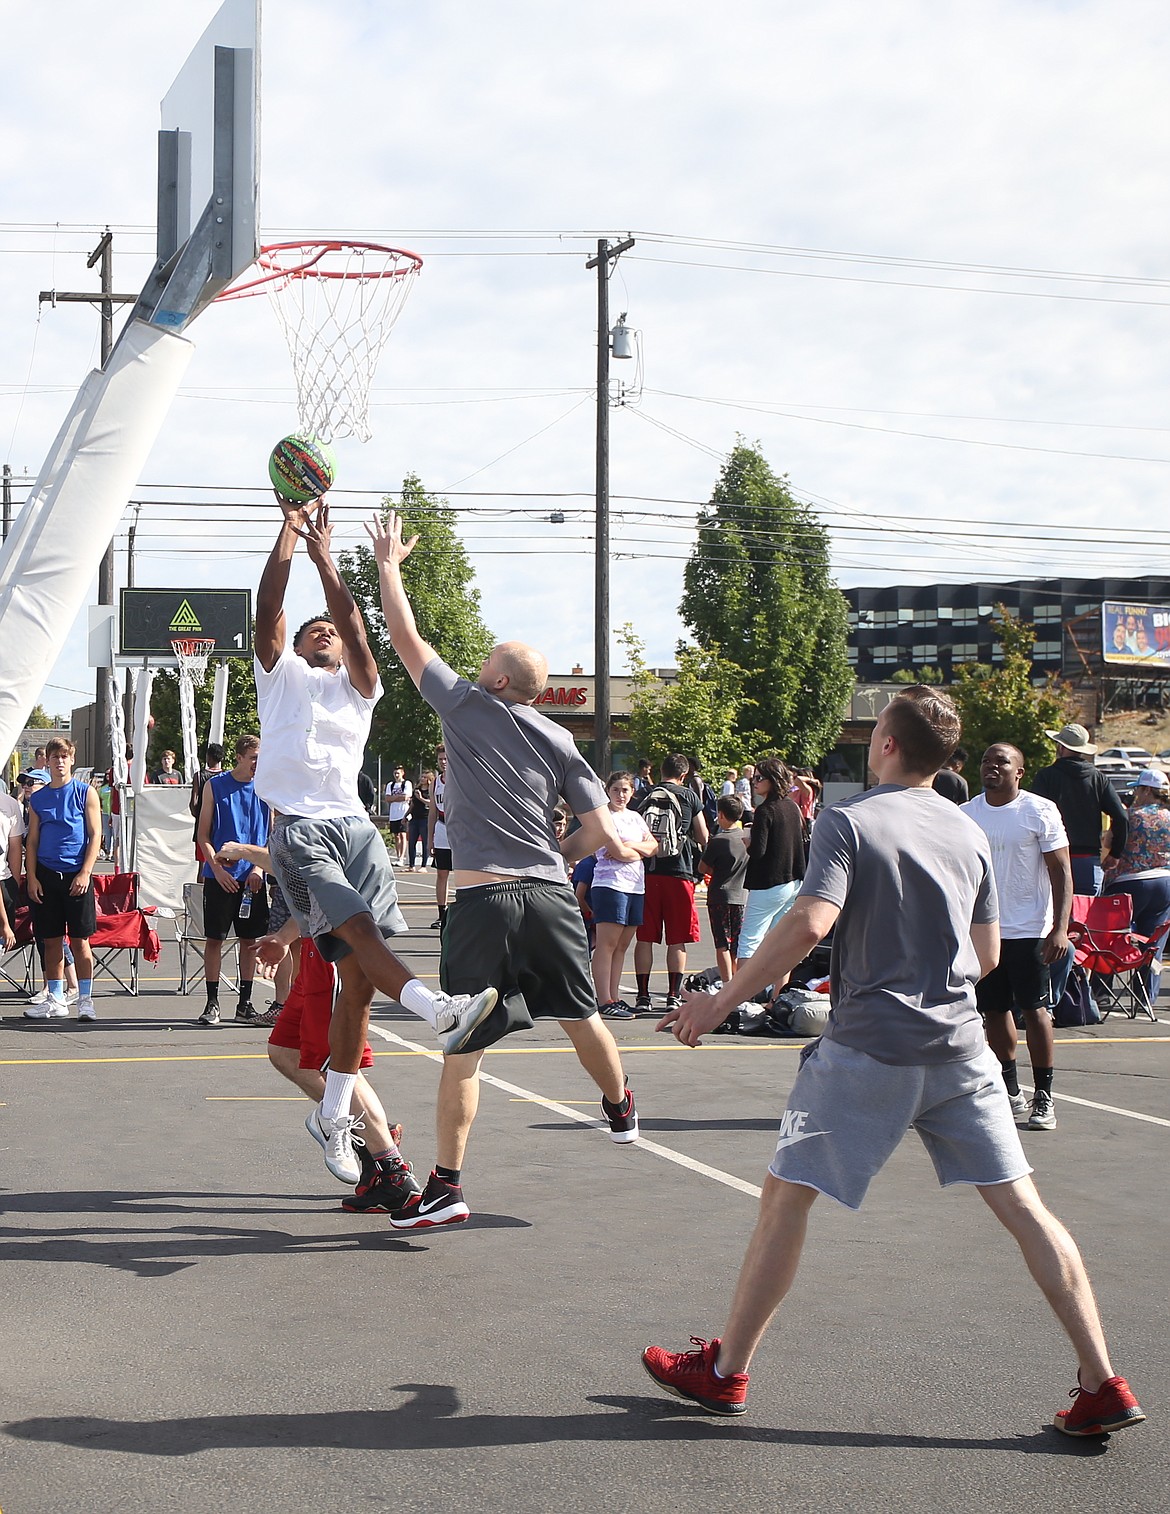 JASON ELLIOTT/Press
Deon Watson of Super Soakers attempts a jumper during an opening round game at Hoopfest on Saturday in the Spokane Arena parking lot.